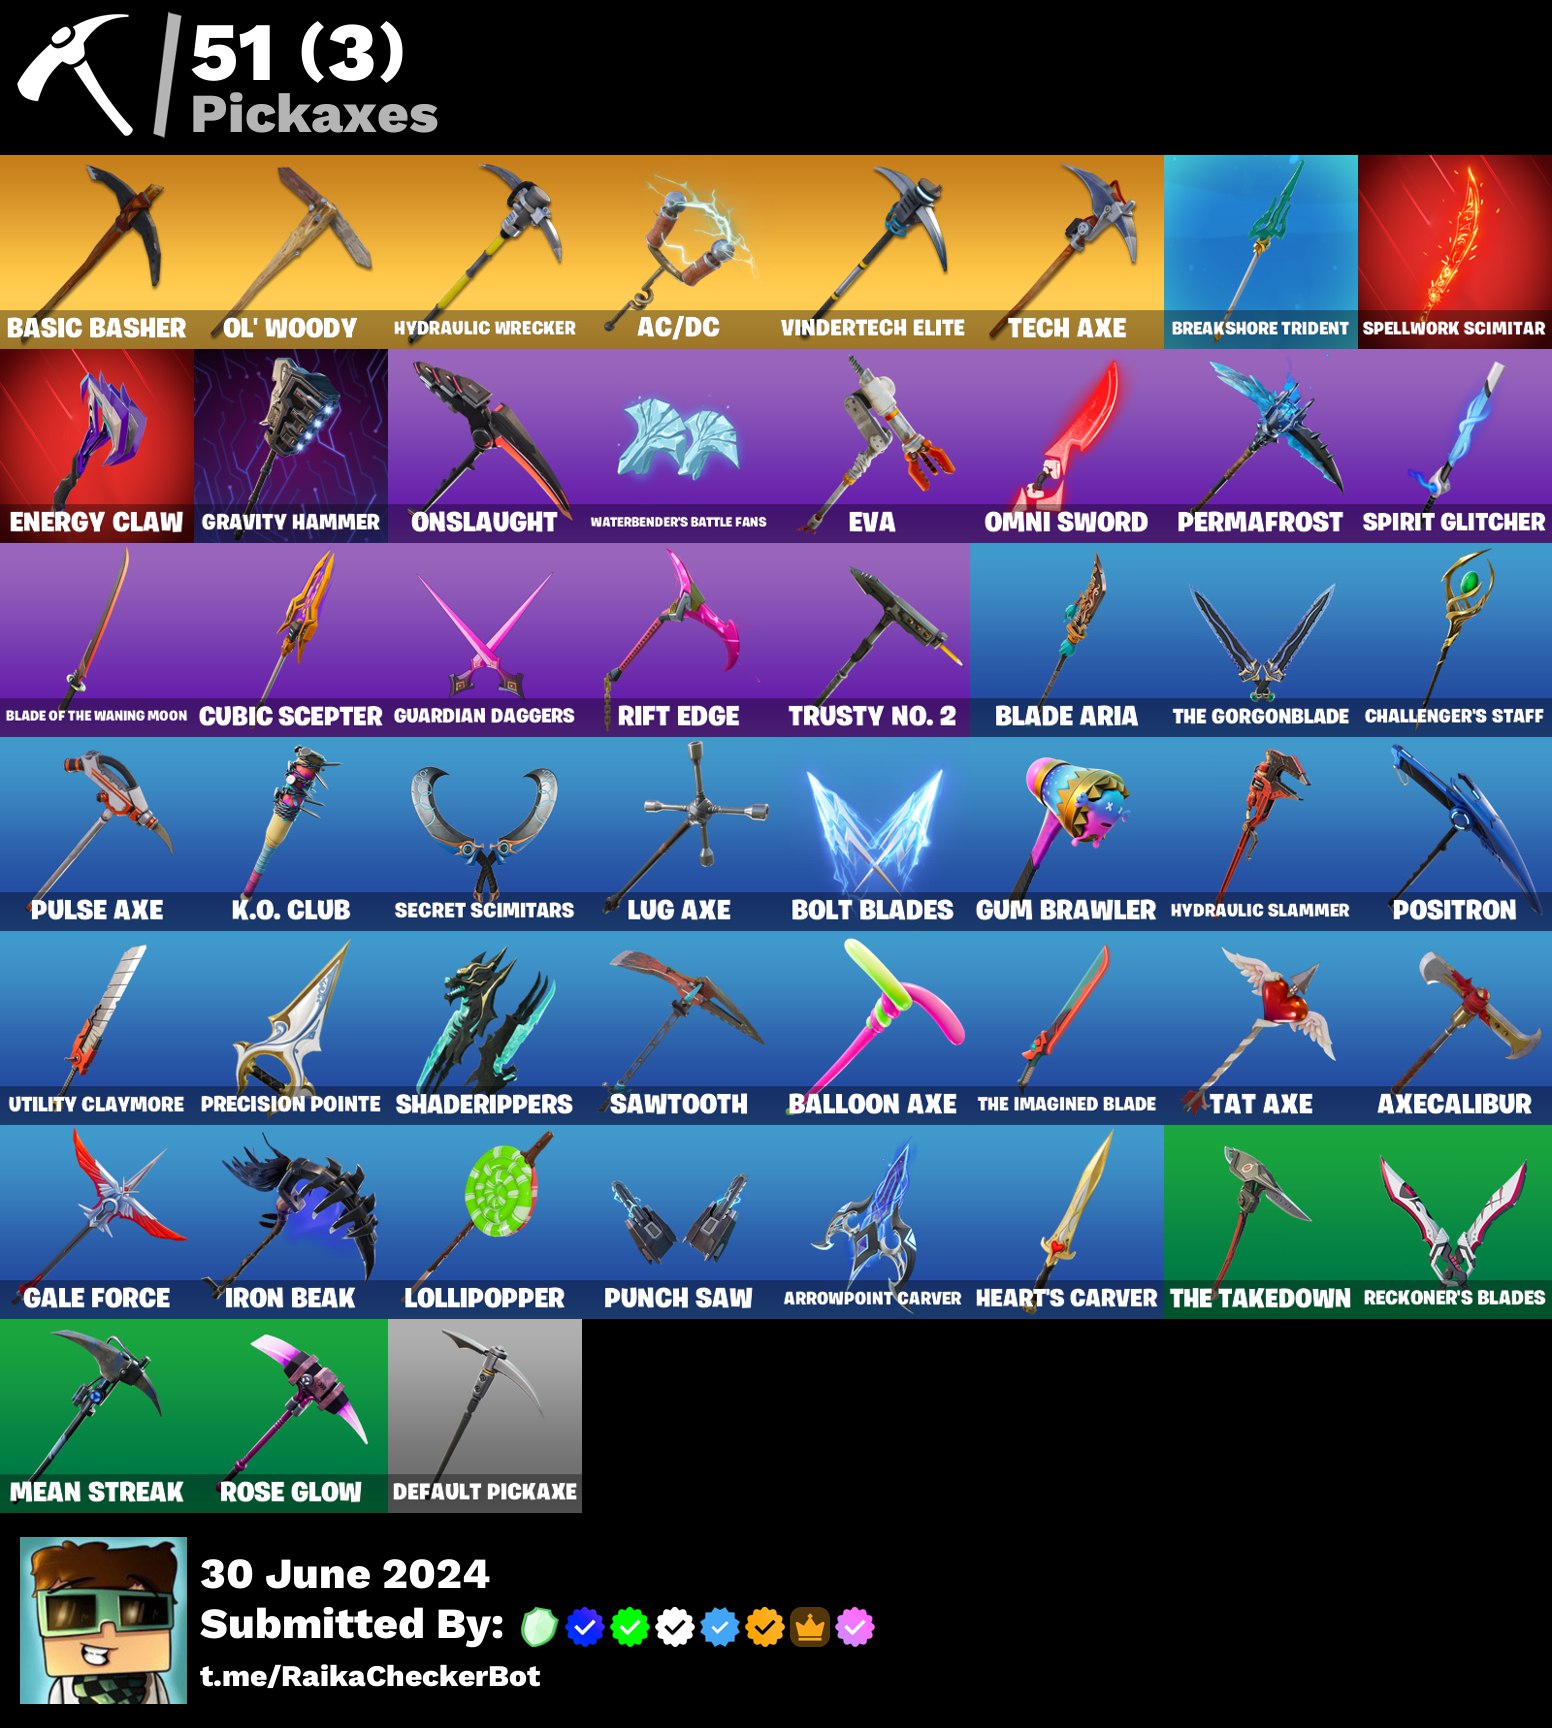 FA [PC] 62 skins, BLACK KNIGHT, FLOSS, Blue Squire, Royal Knight und Sparkle Specialist